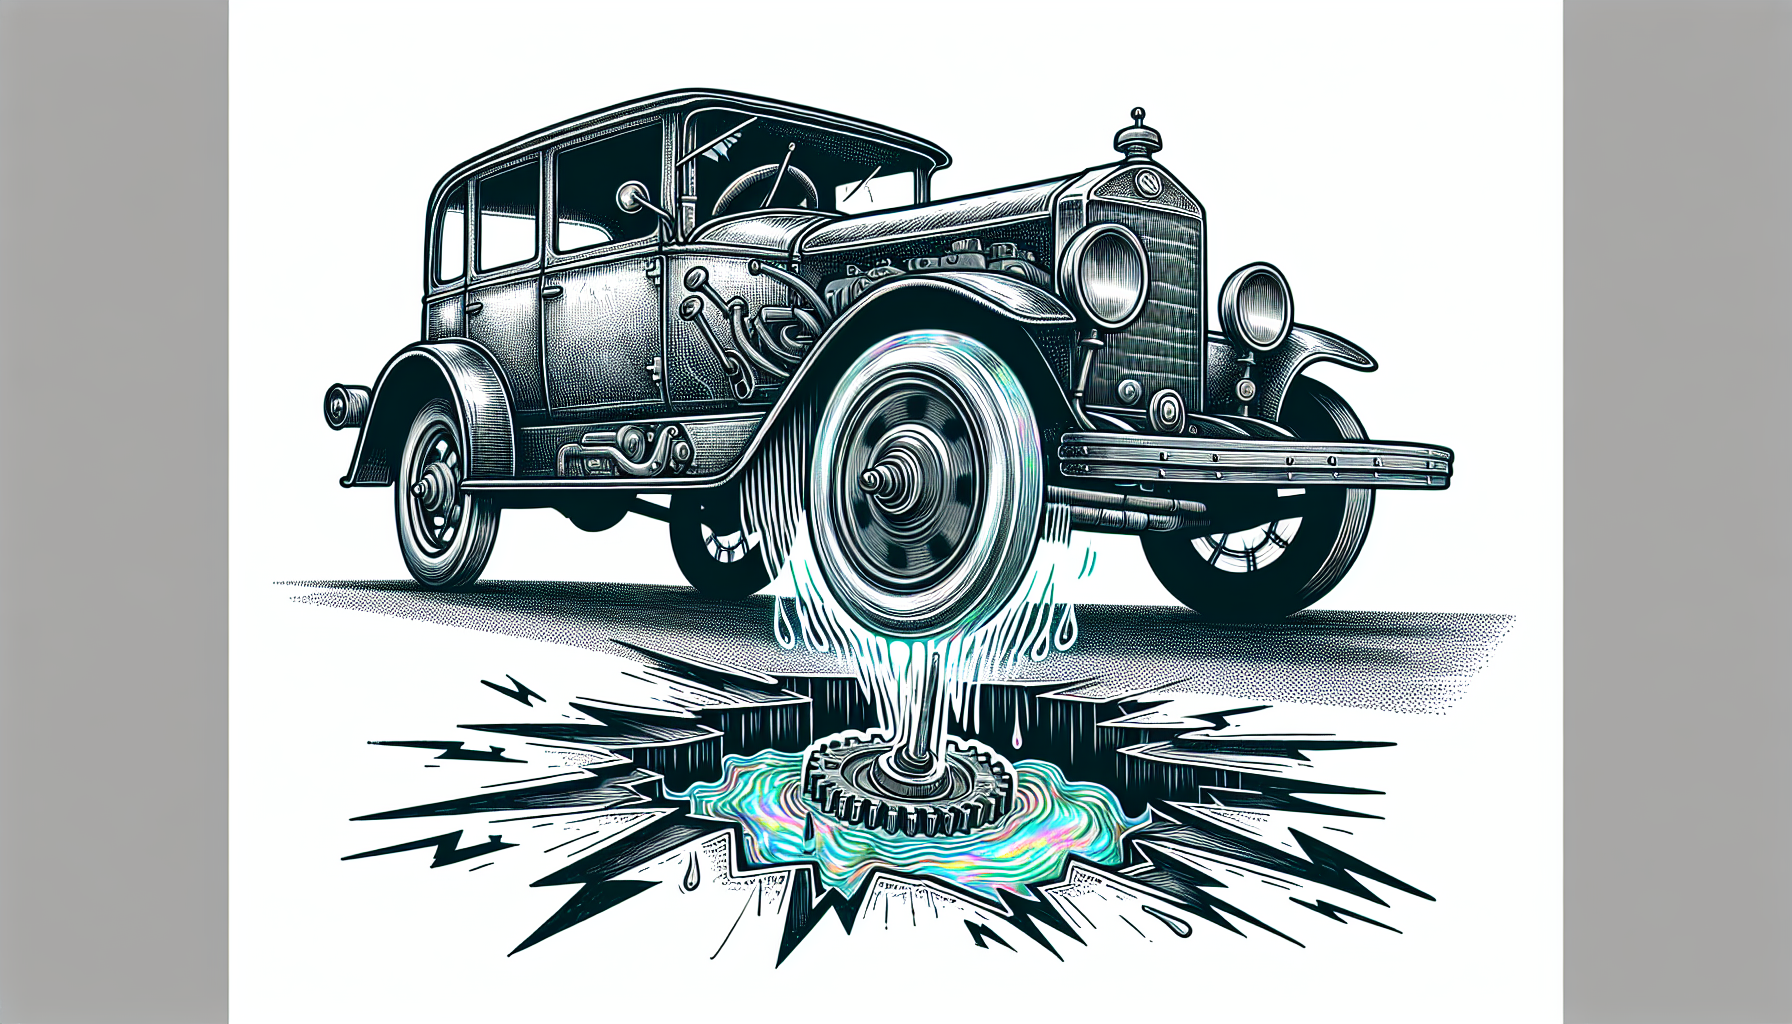 Illustration of a car with transmission issues